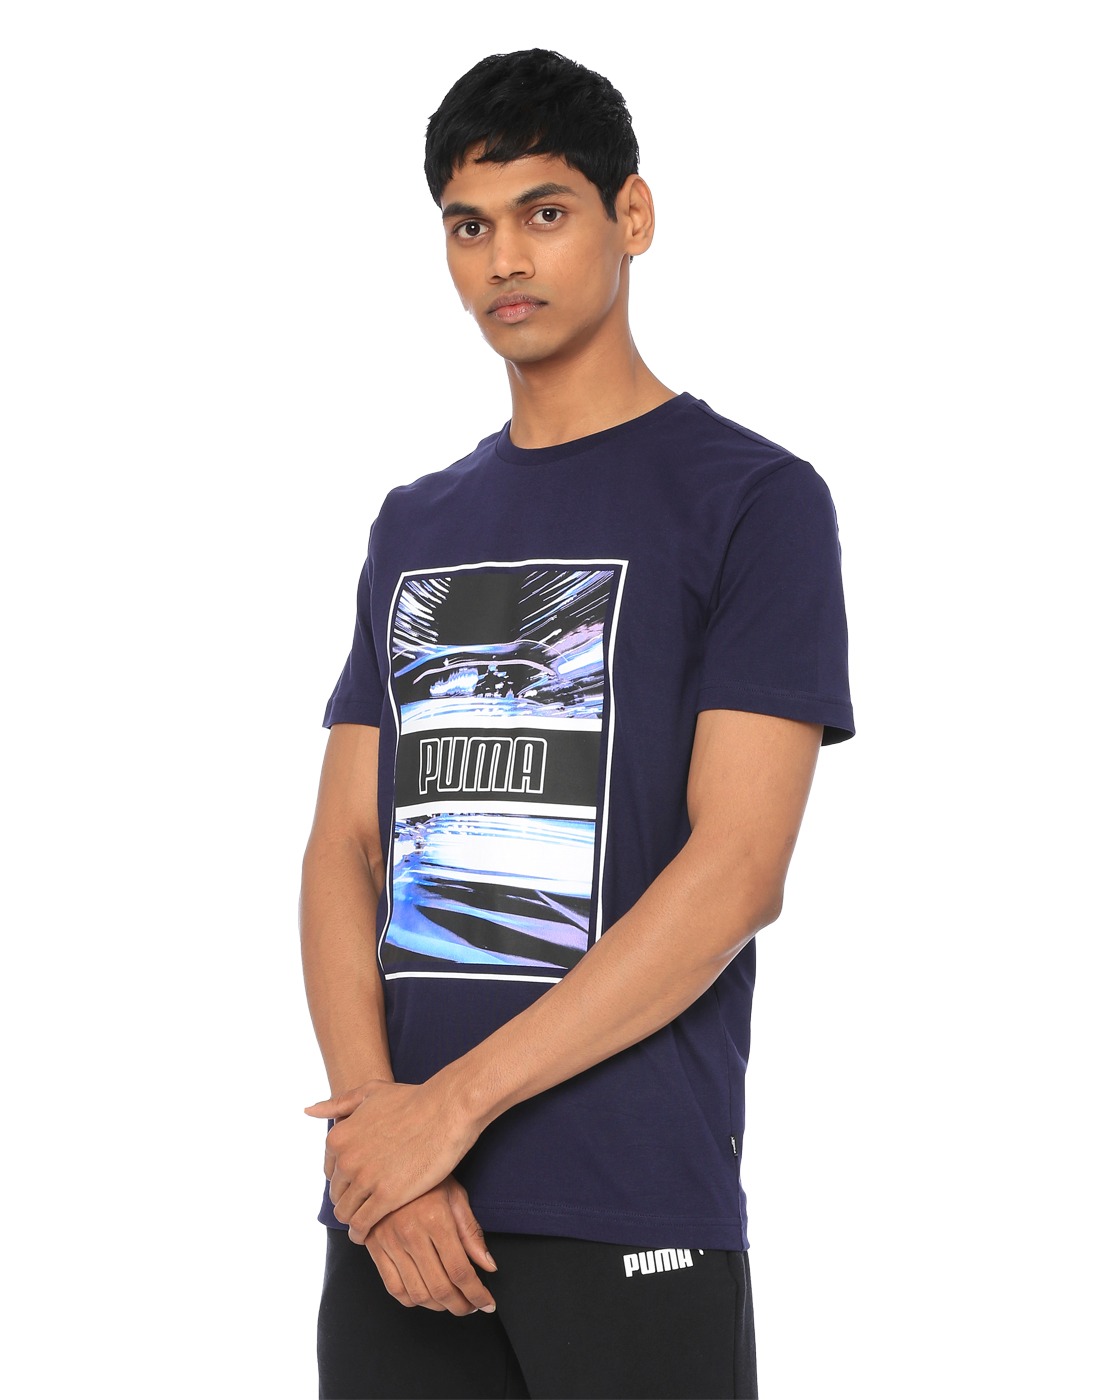 Buy PUMA T-Shirts & Tops at Best Prices Online in Bangladesh | Sport-T-Shirts